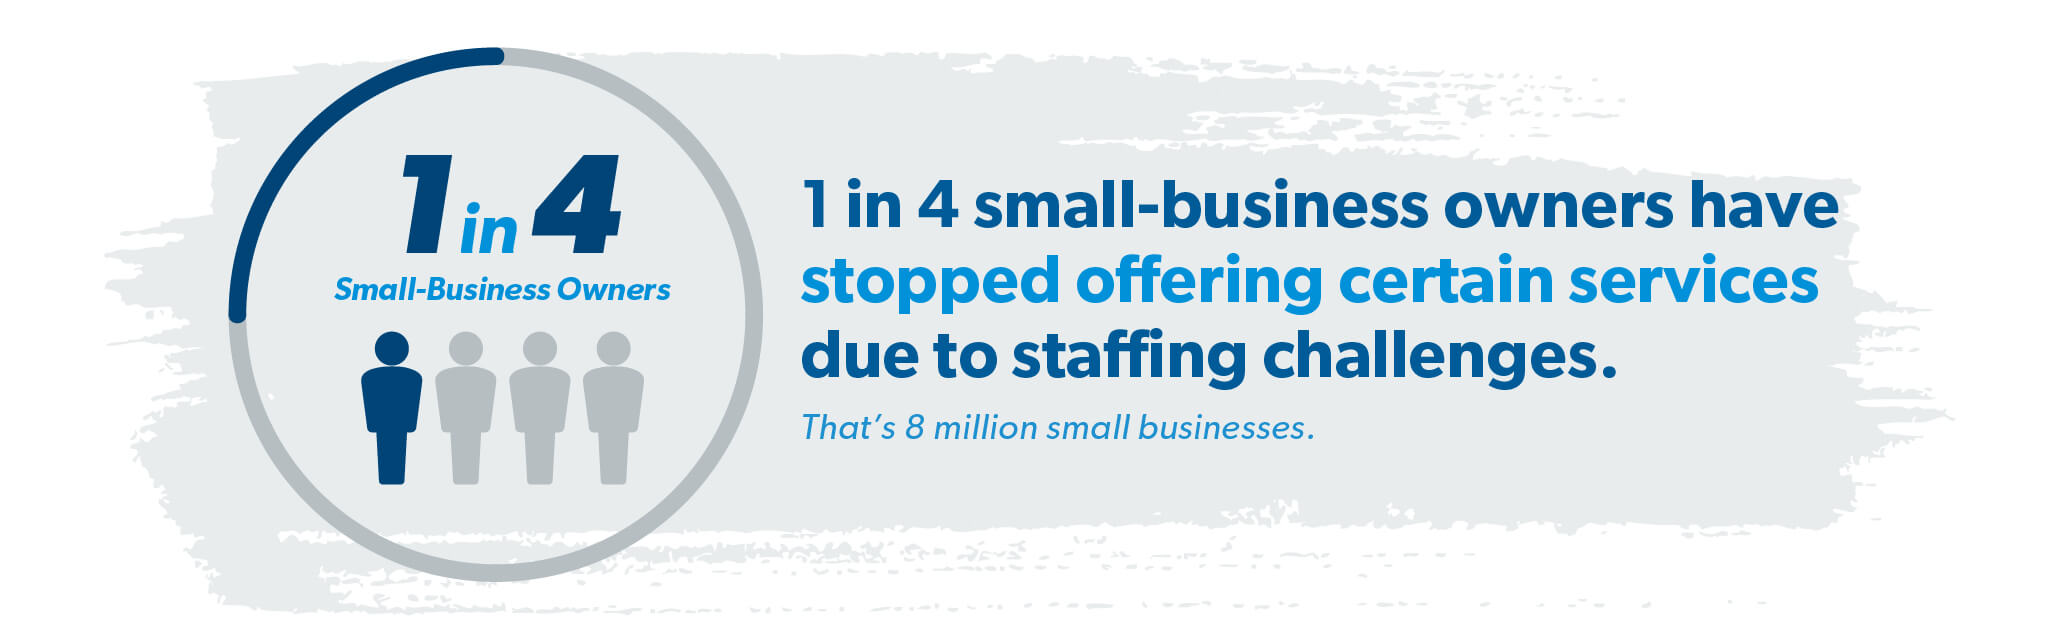 1 in 4 small-business owners have stopped offering certain services due to staffing changes